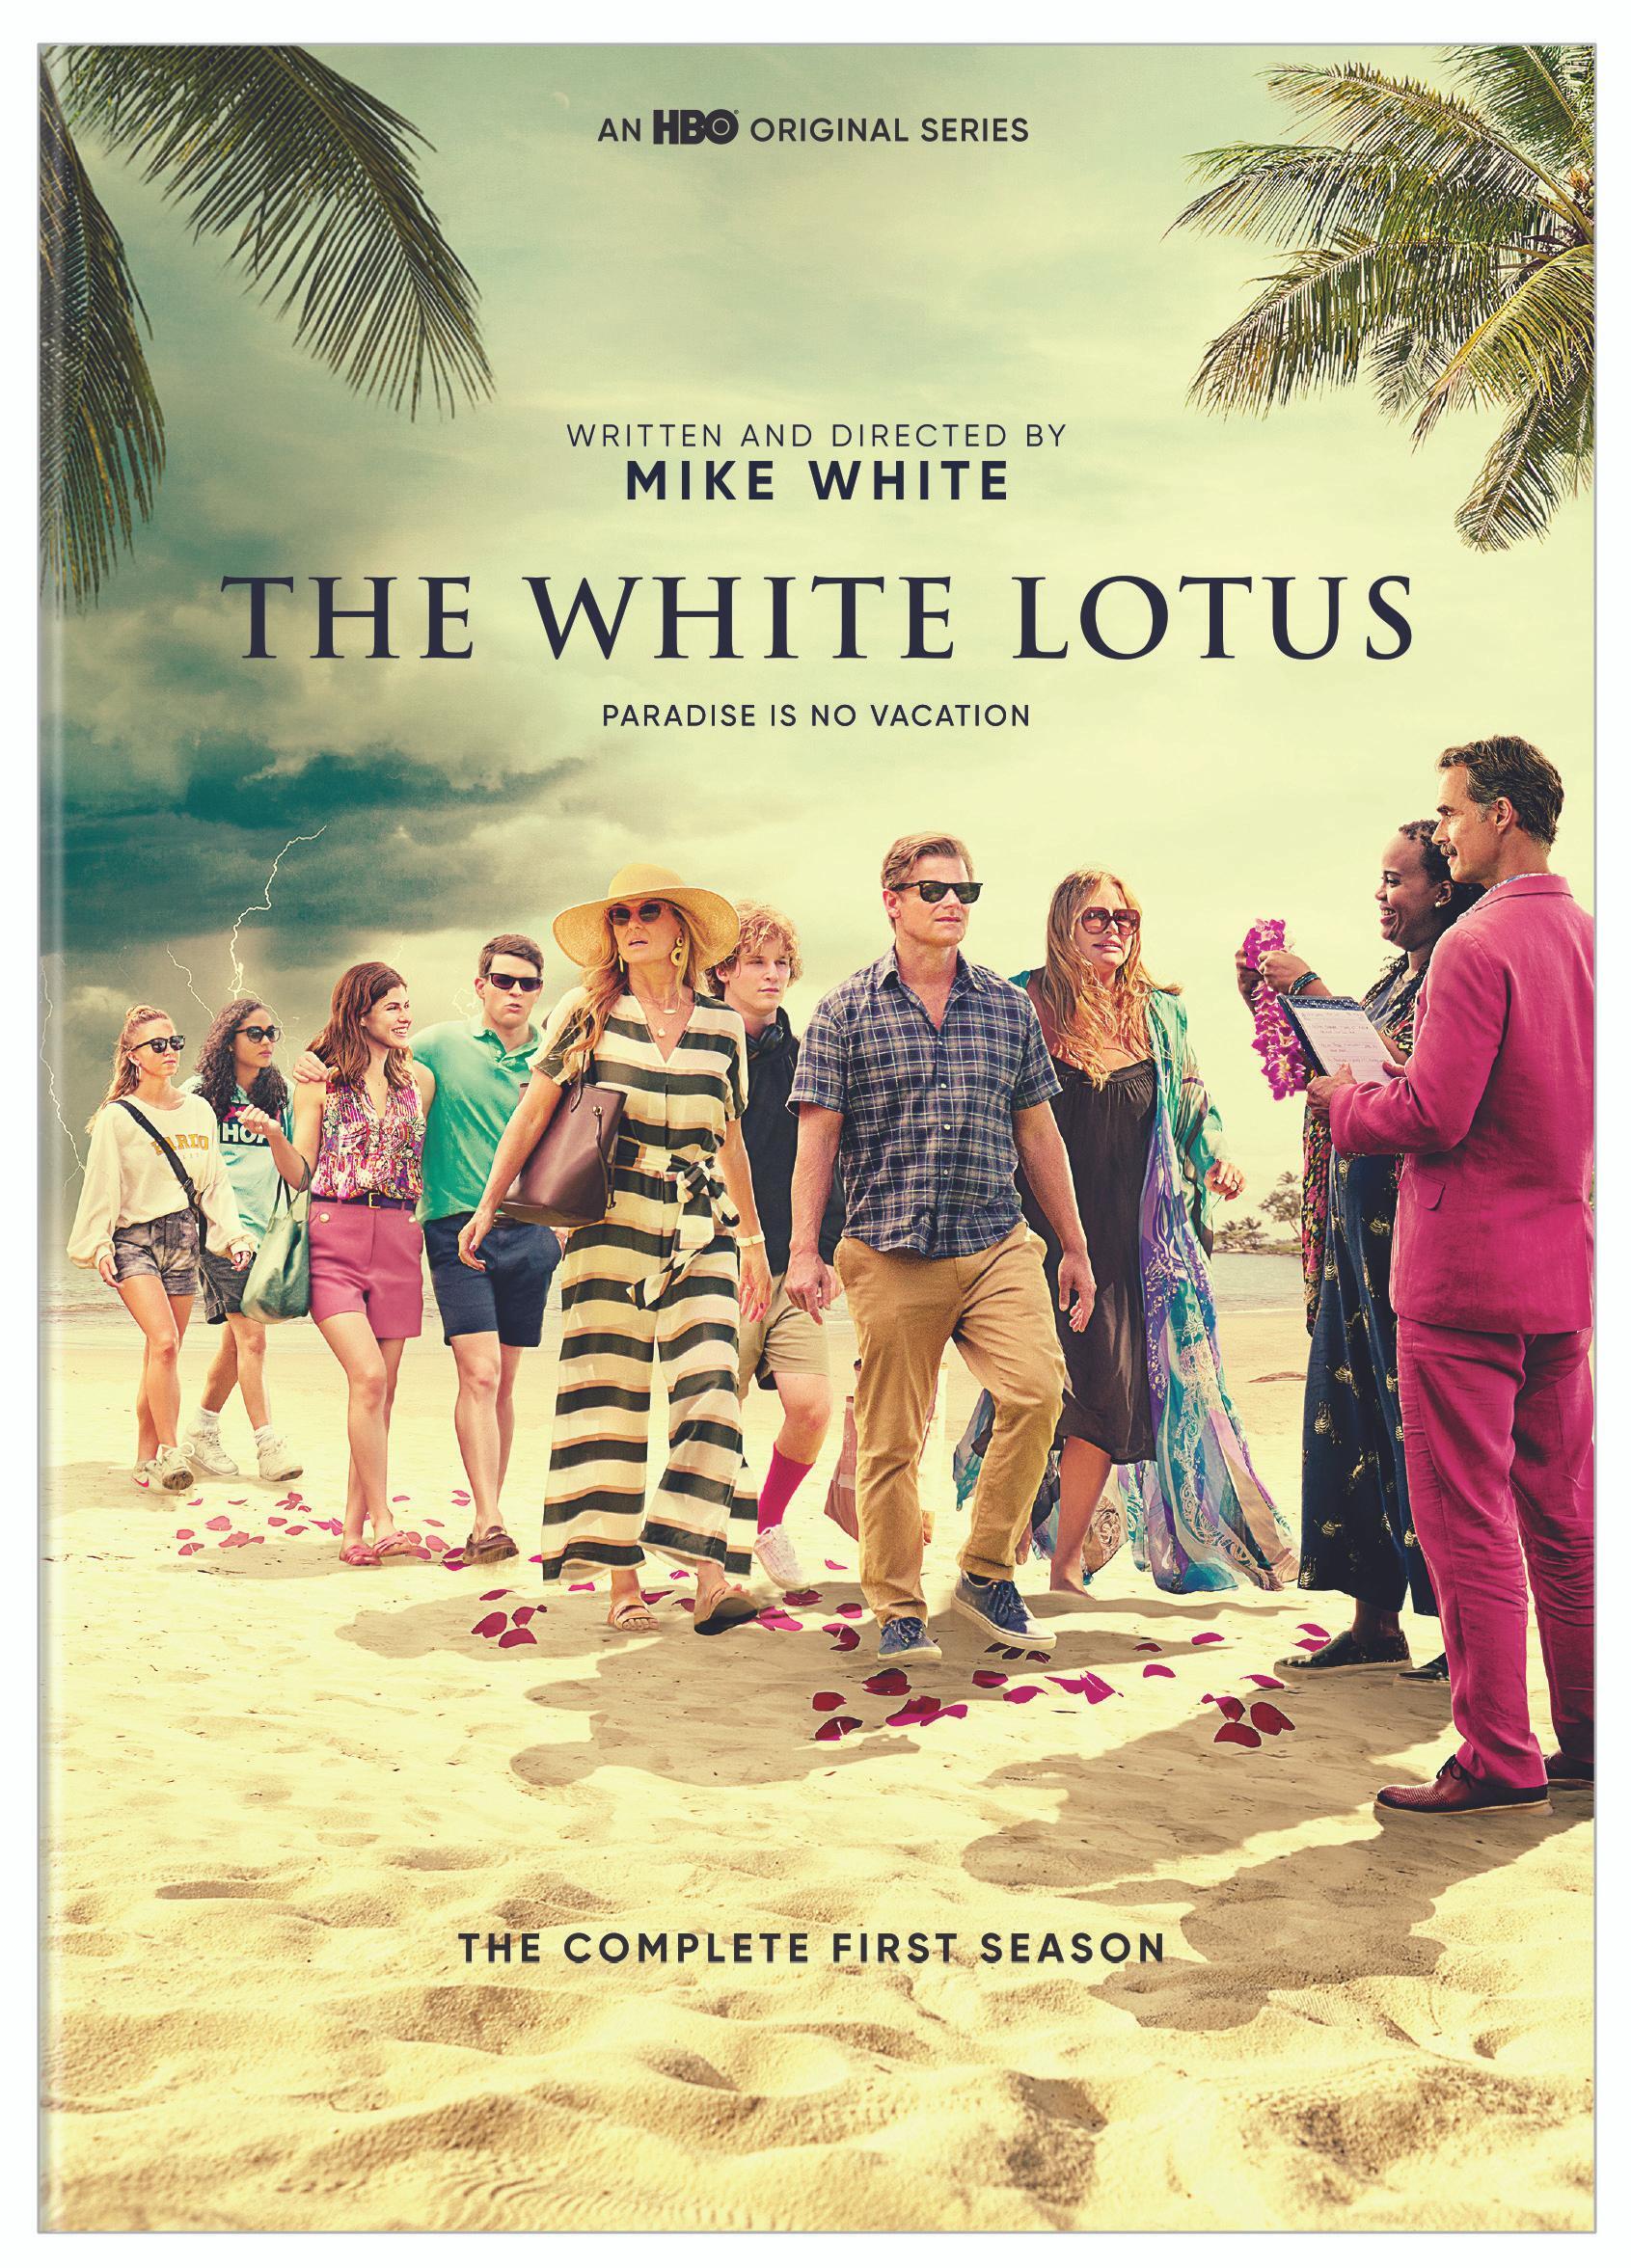 The White Lotus: The Complete First Season - DVD [ 2021 ]  - Comedy Television On DVD - TV Shows On GRUV